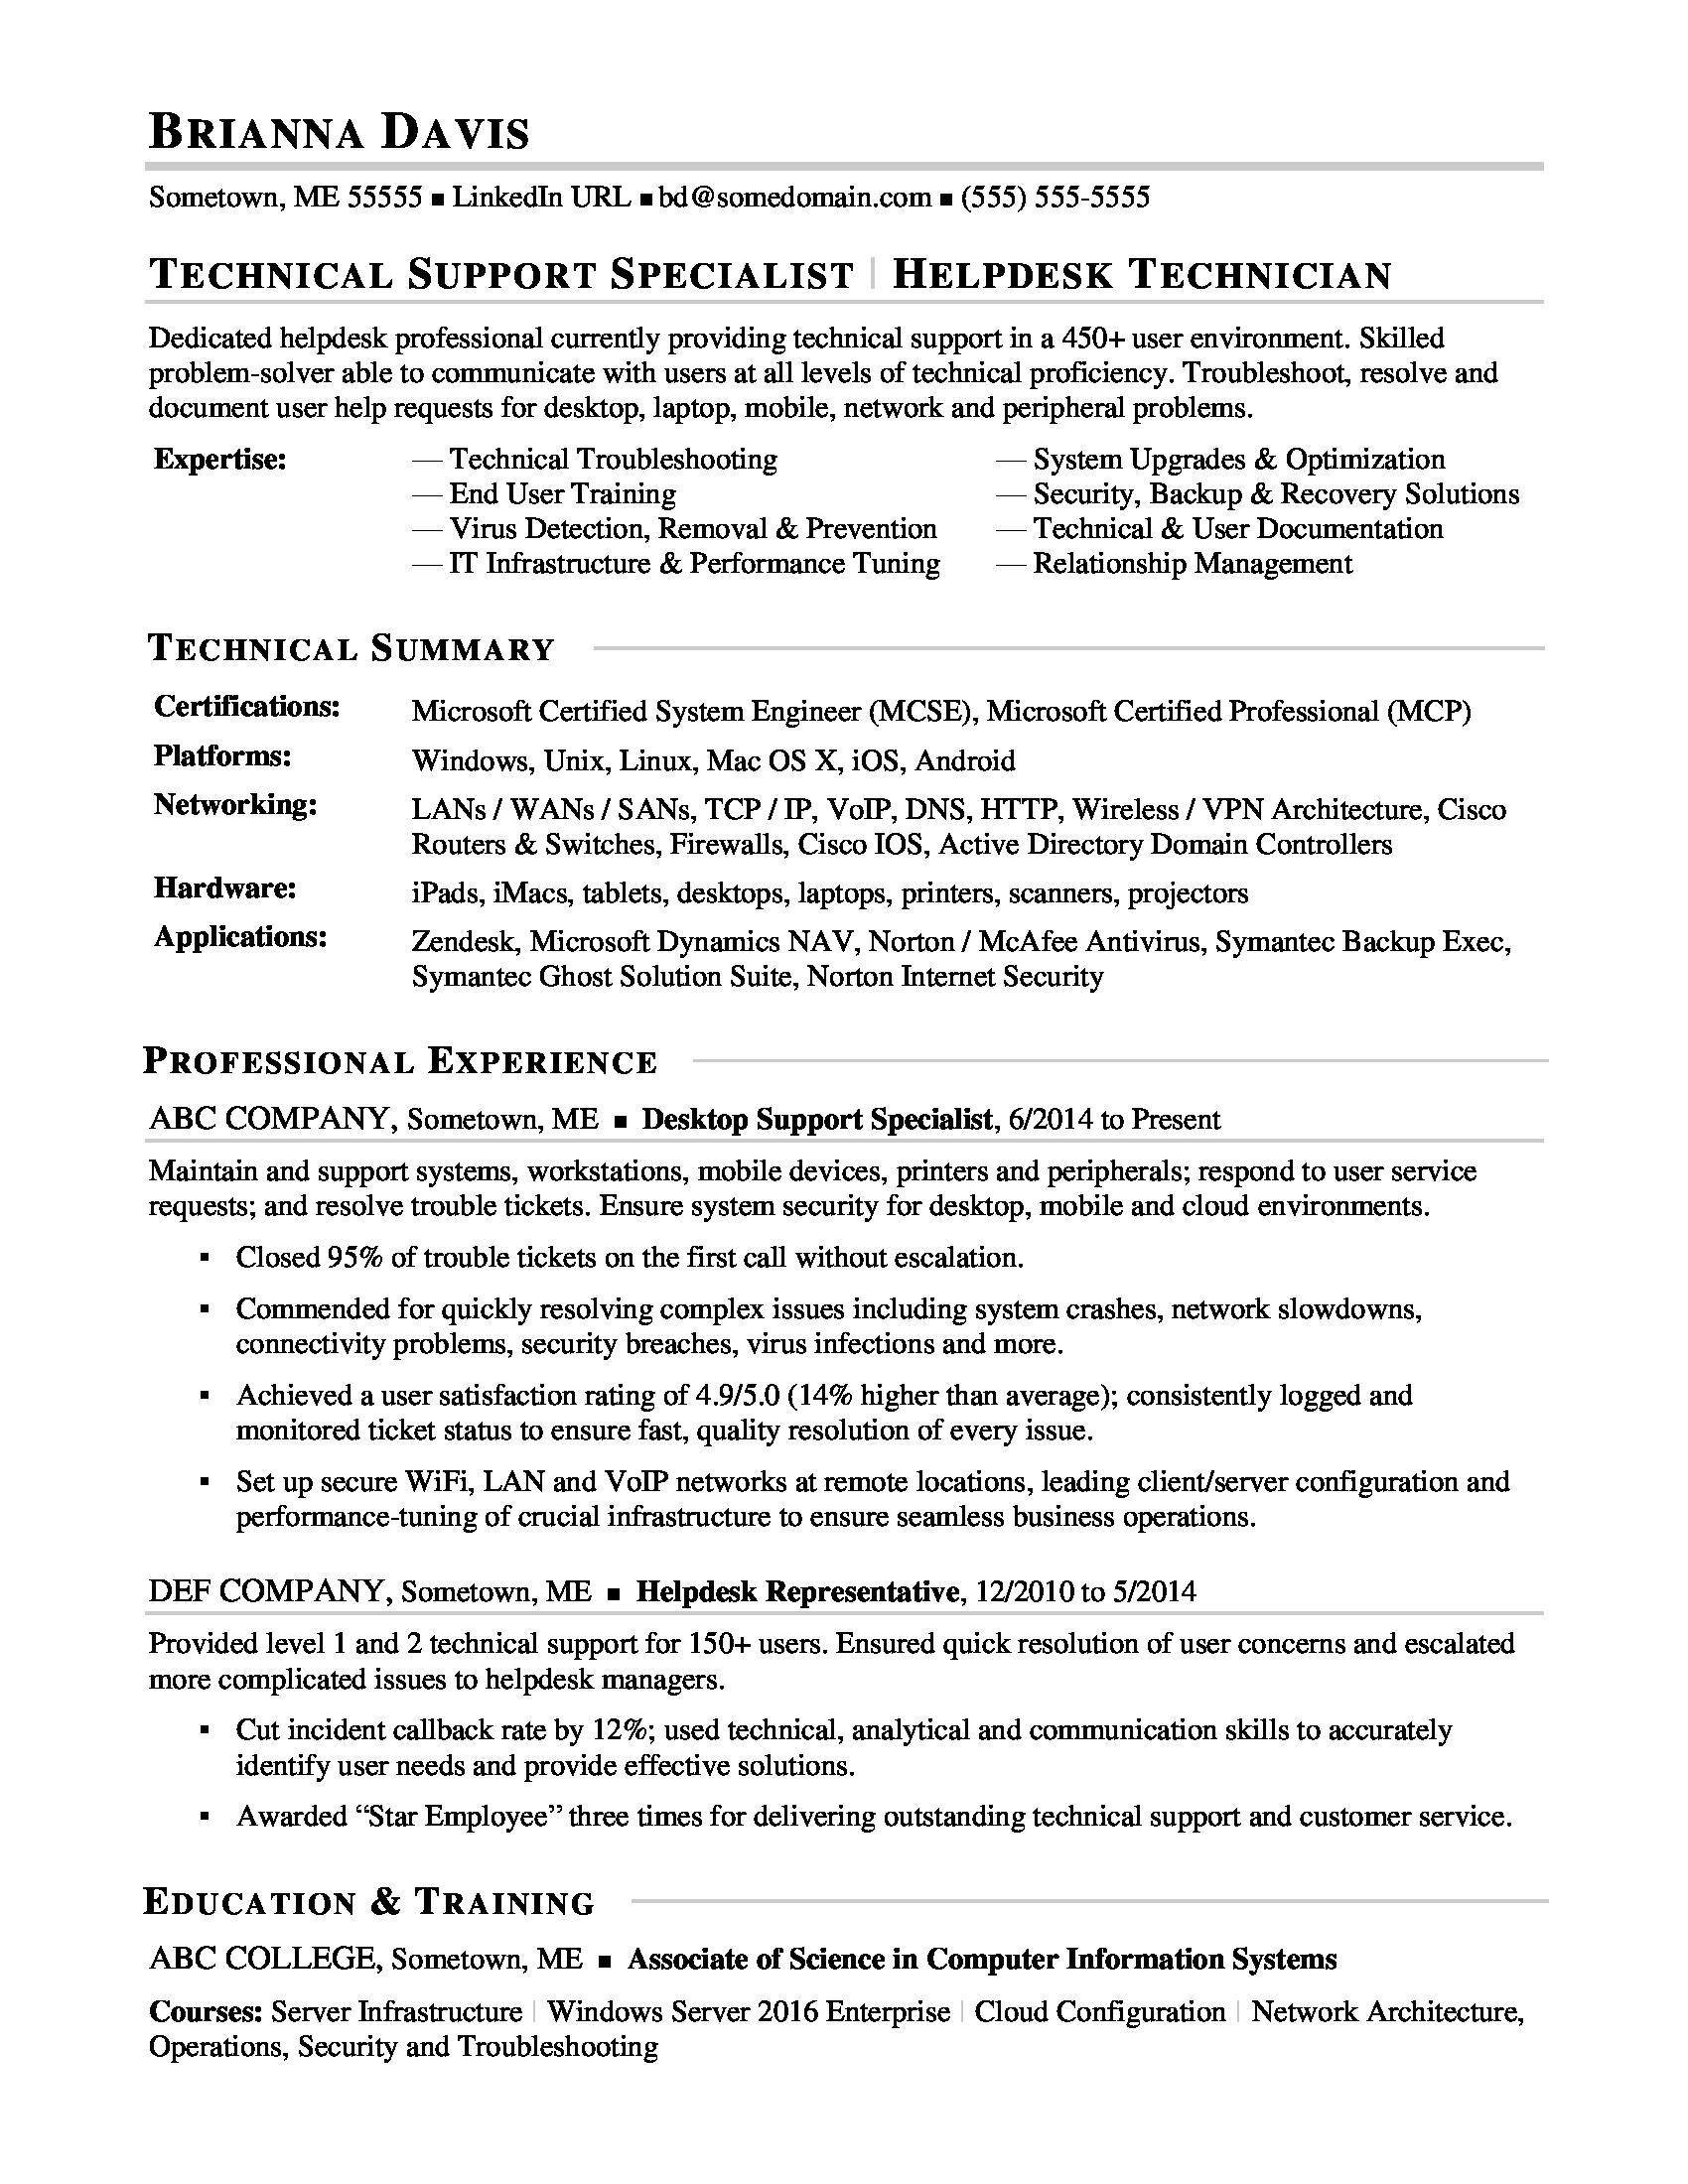 Sample Resume for Information Technology Specialist Sample Resume for Experienced It Help Desk Employee Monster.com